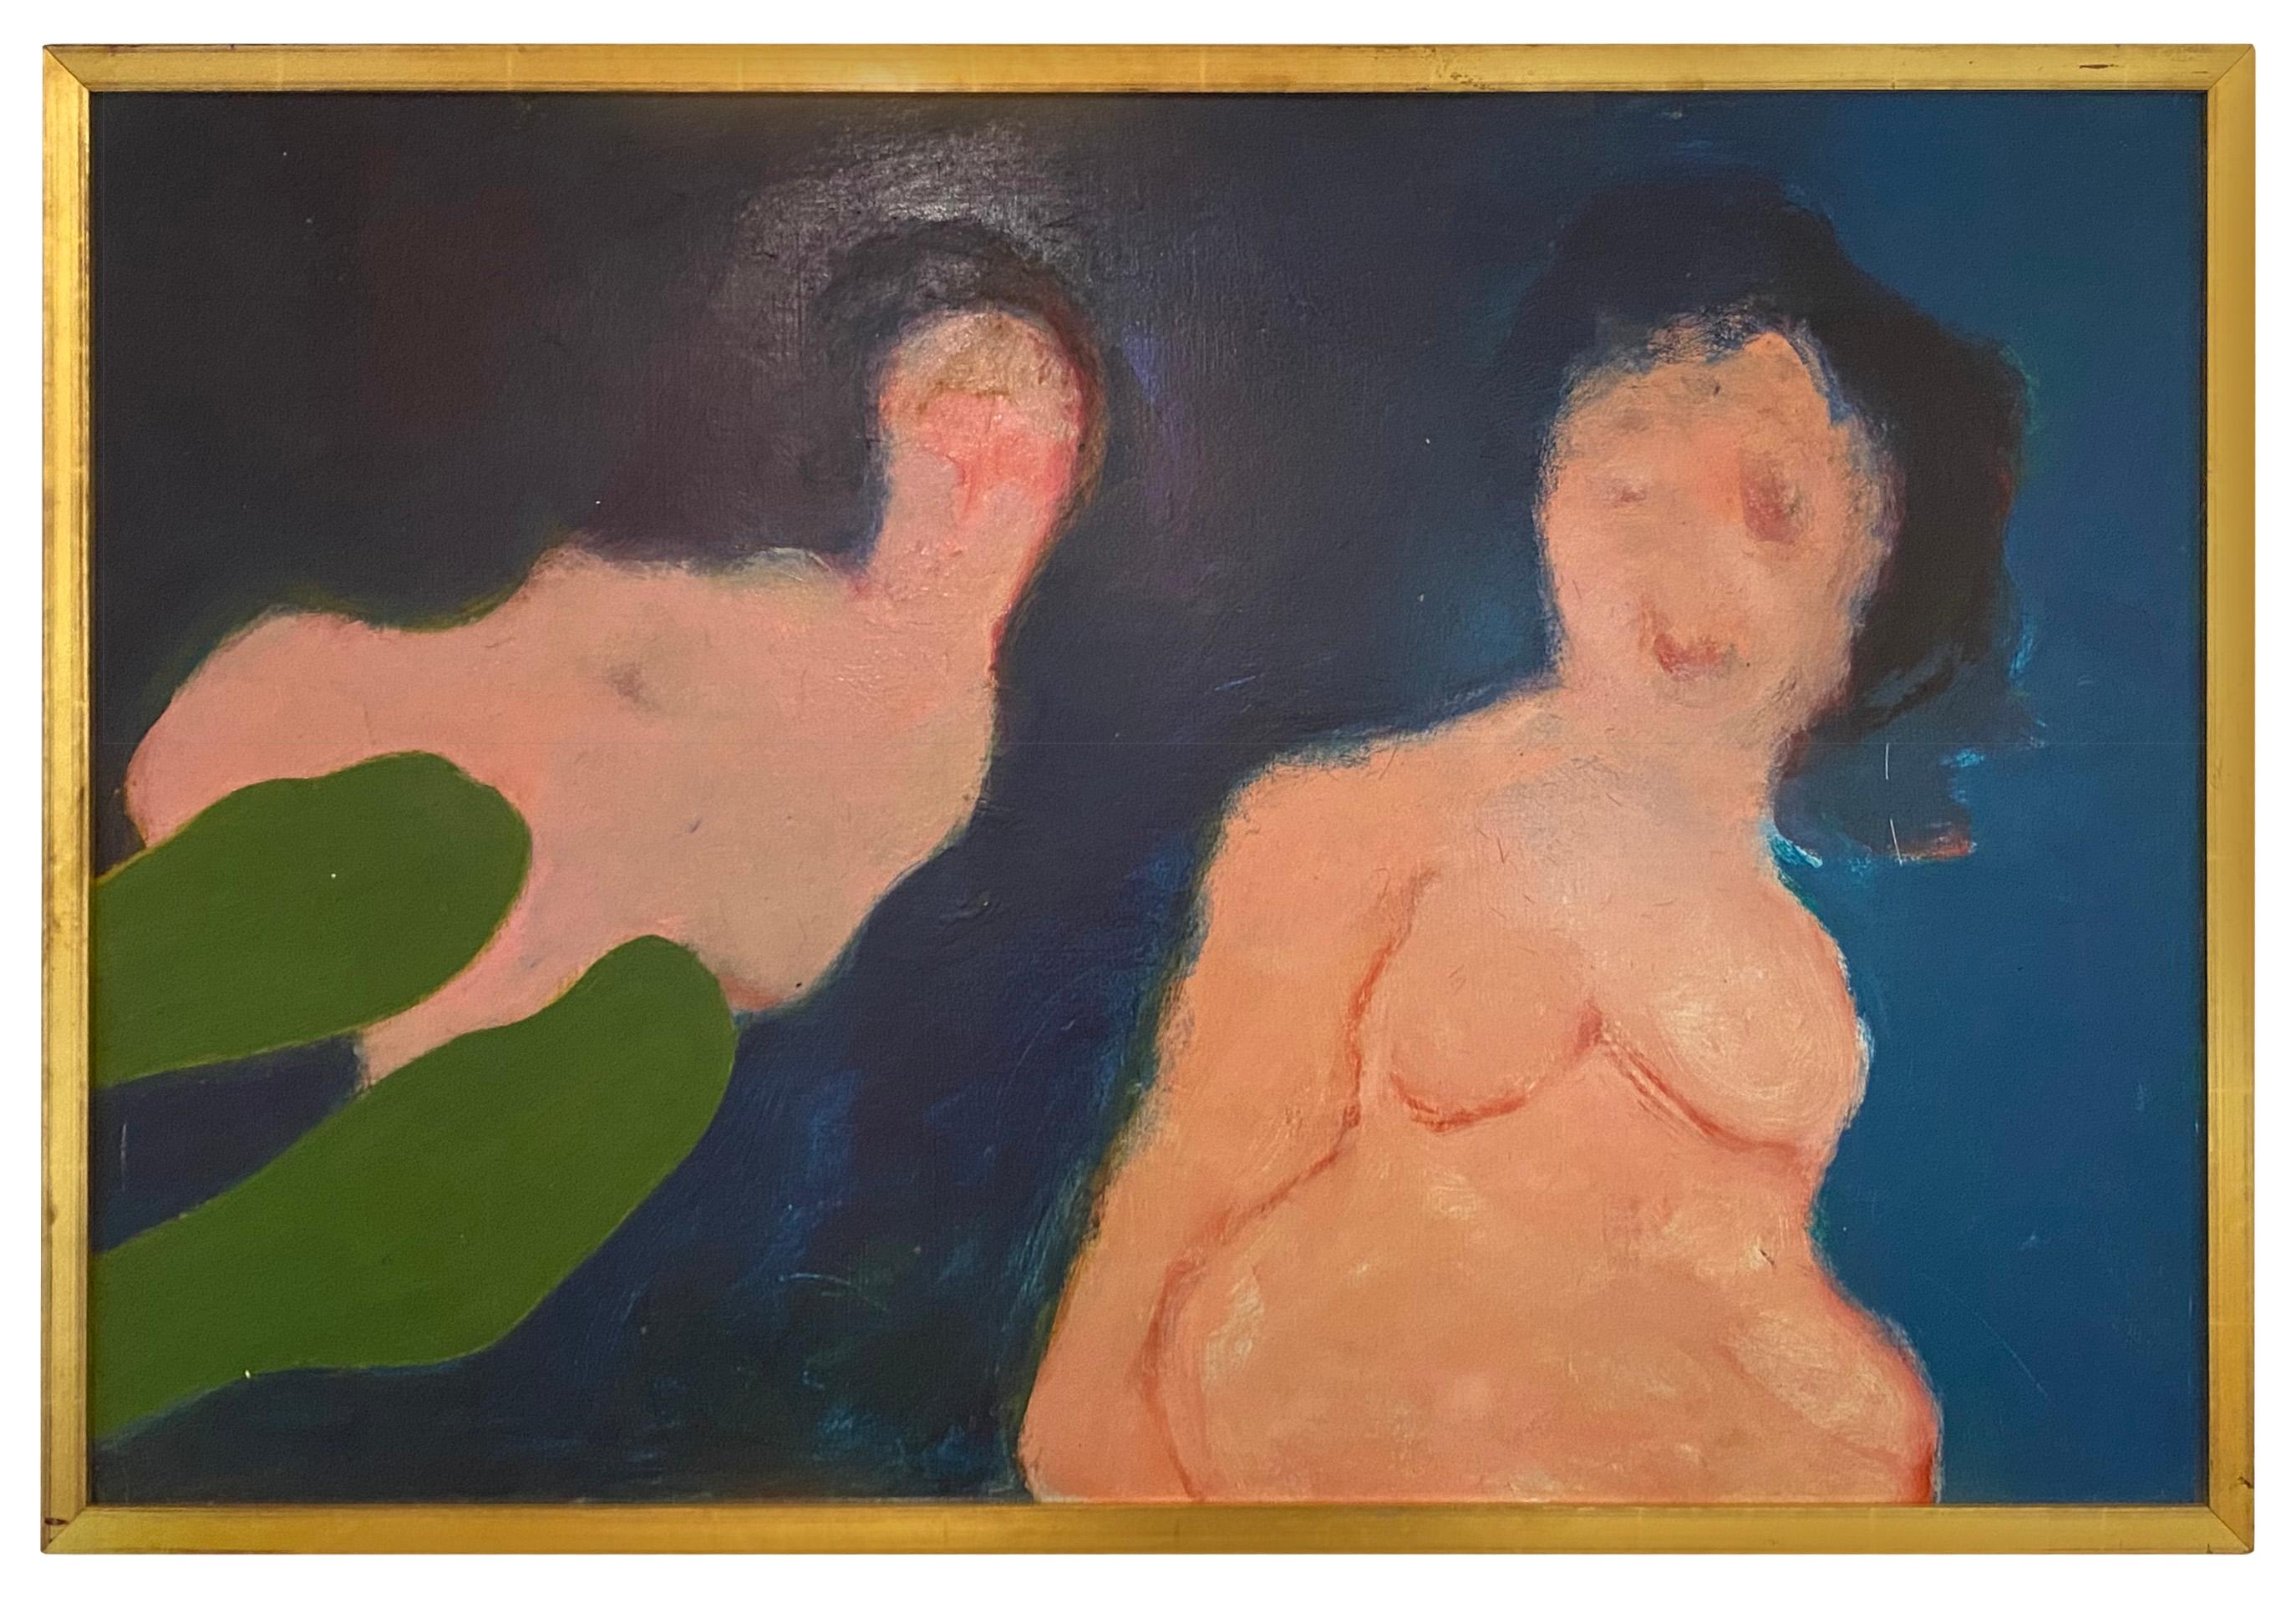 Exquisite oil painting by mid-century artist Martin Sumers. Abstracted figures rendered in rich, saturated colors. Signed verso. Highly collectible, exceptional piece.

Martin Sumers (1922 to 2012) was a prolific New York painter and sculptor with a